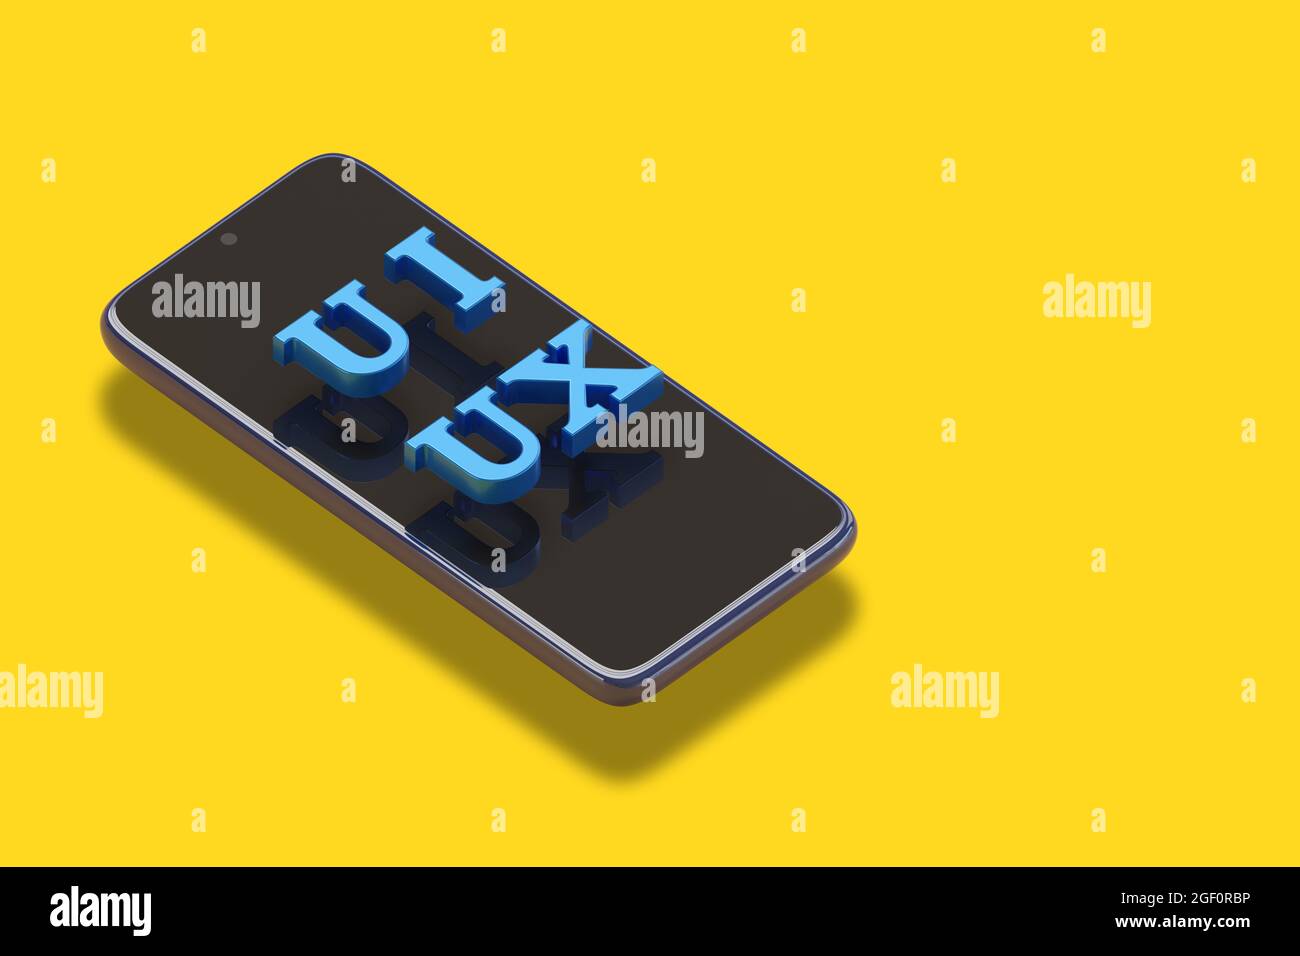 Mobile phone with ui ux text in three dimensions. Isometric projection. 3d illustration. Stock Photo